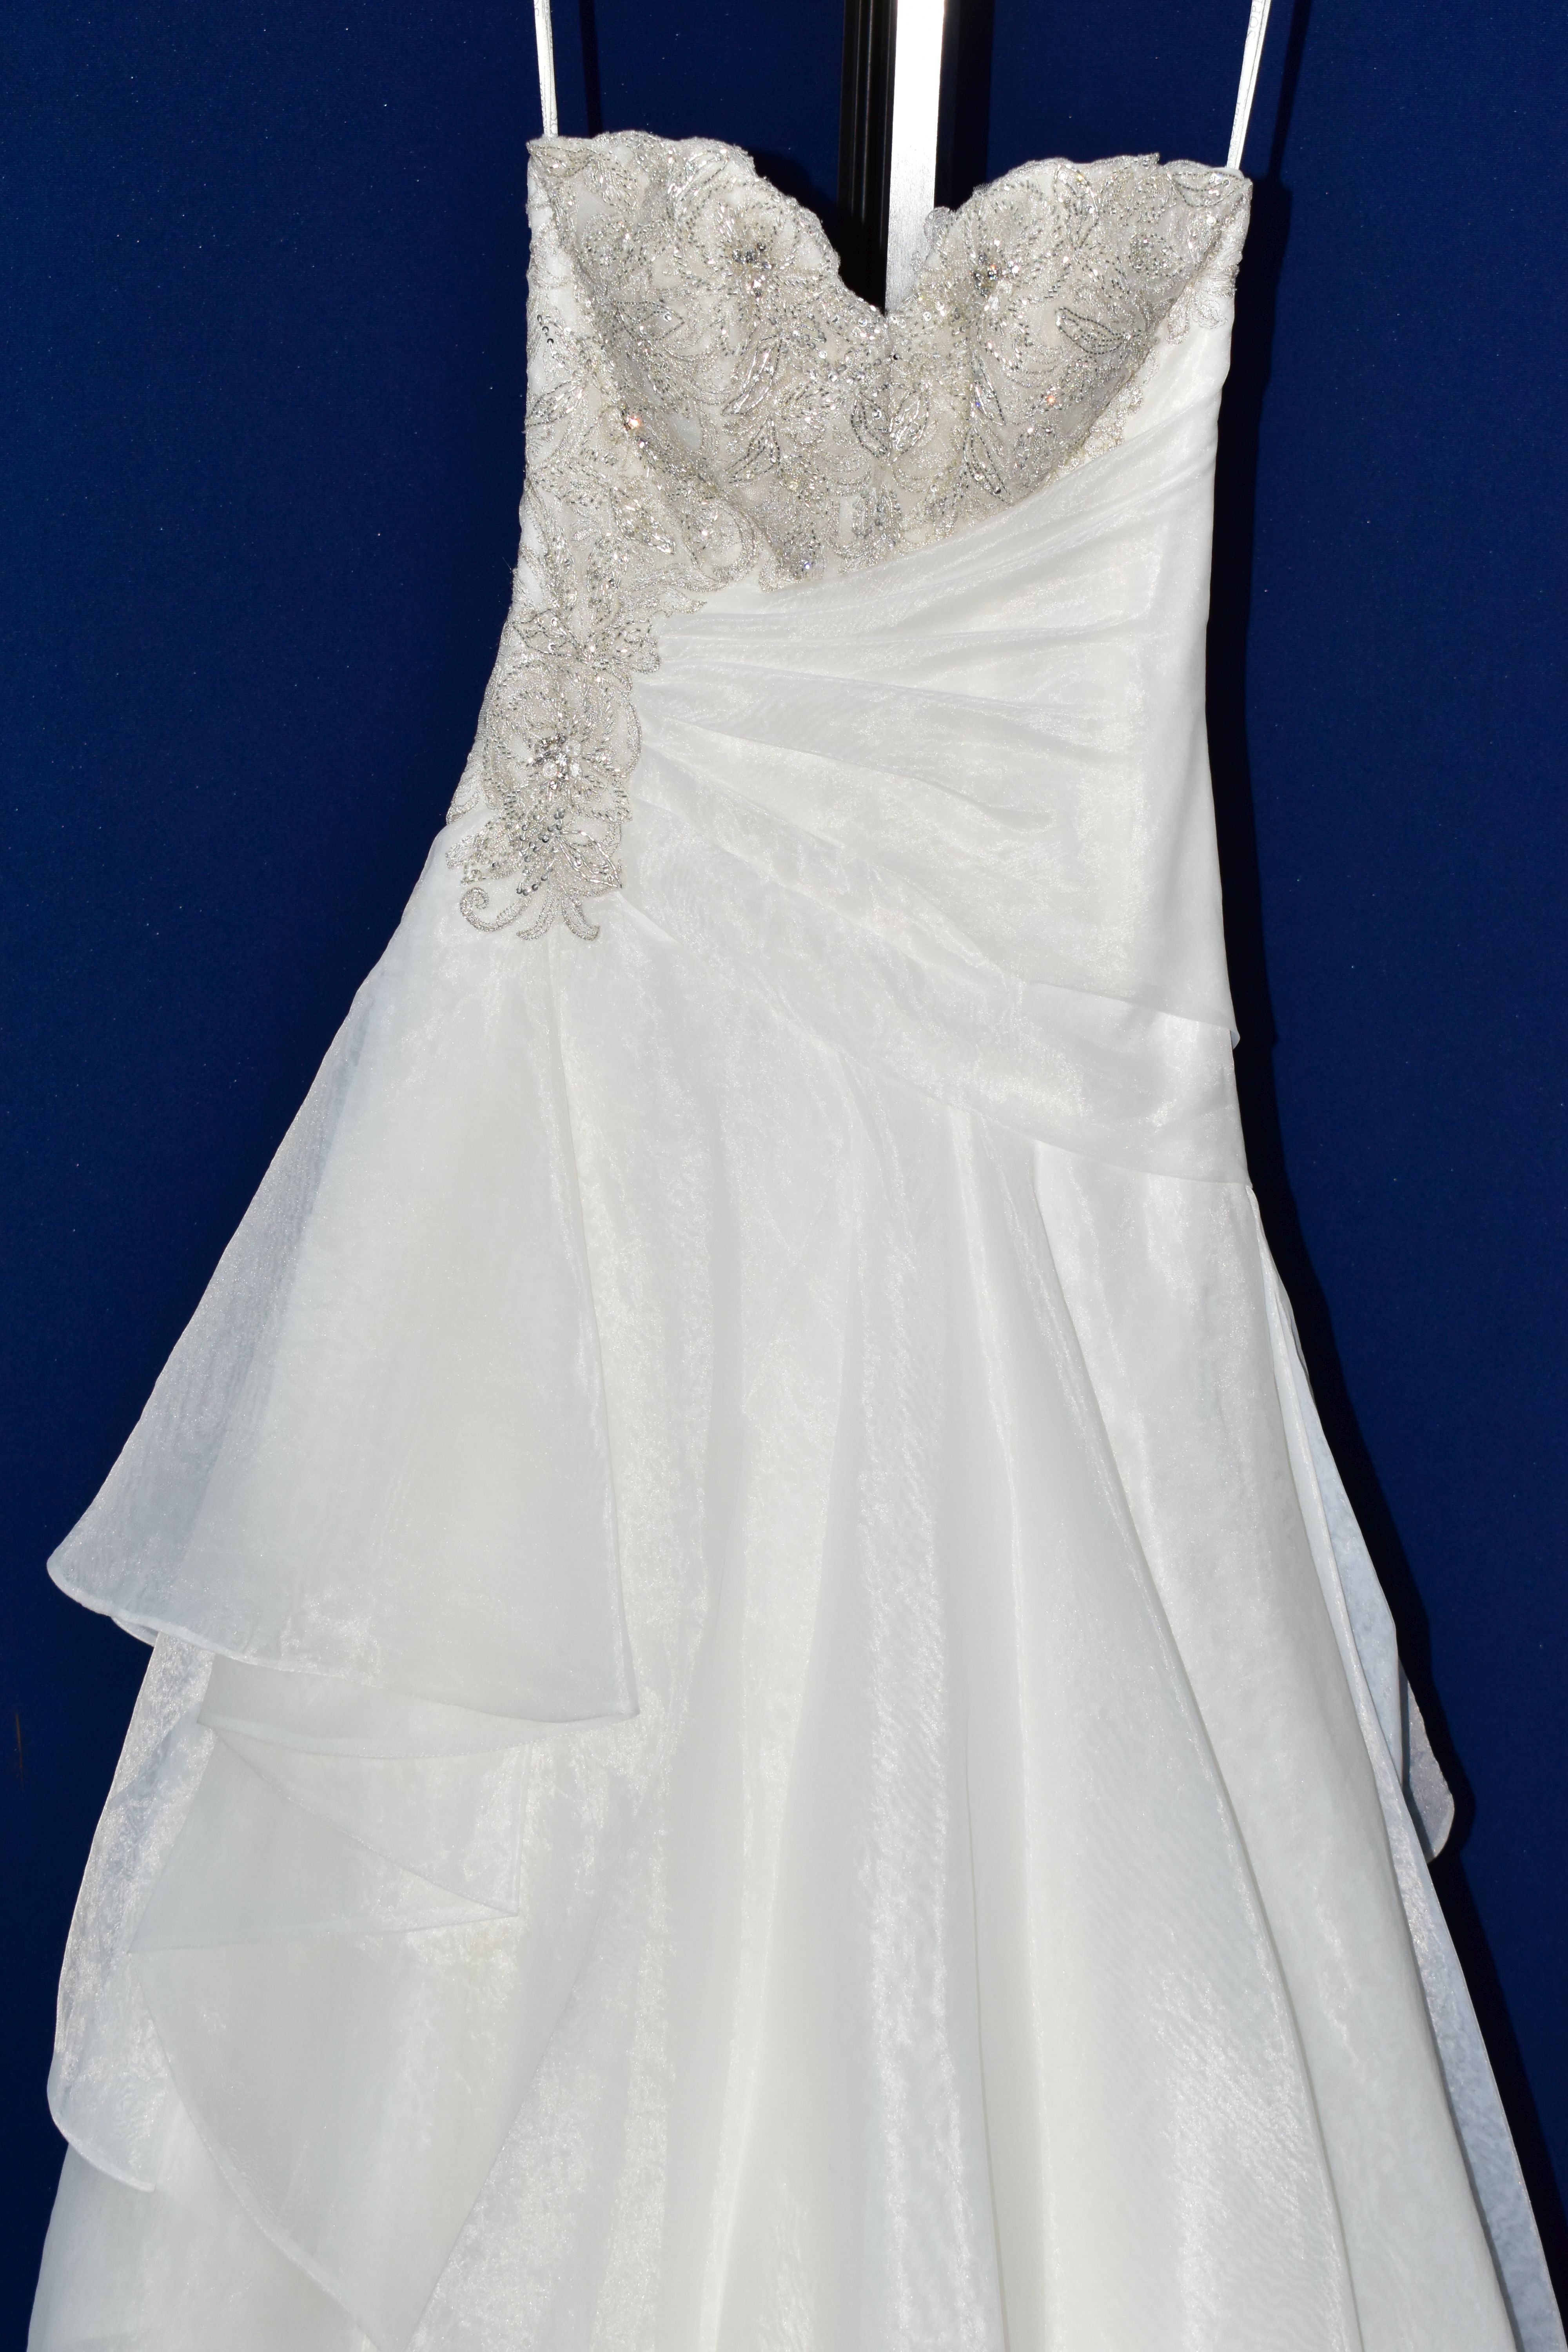 WEDDING DRESS, size 6, long train, pewter accent beaded appliques, strapping detail in the back, - Image 2 of 10